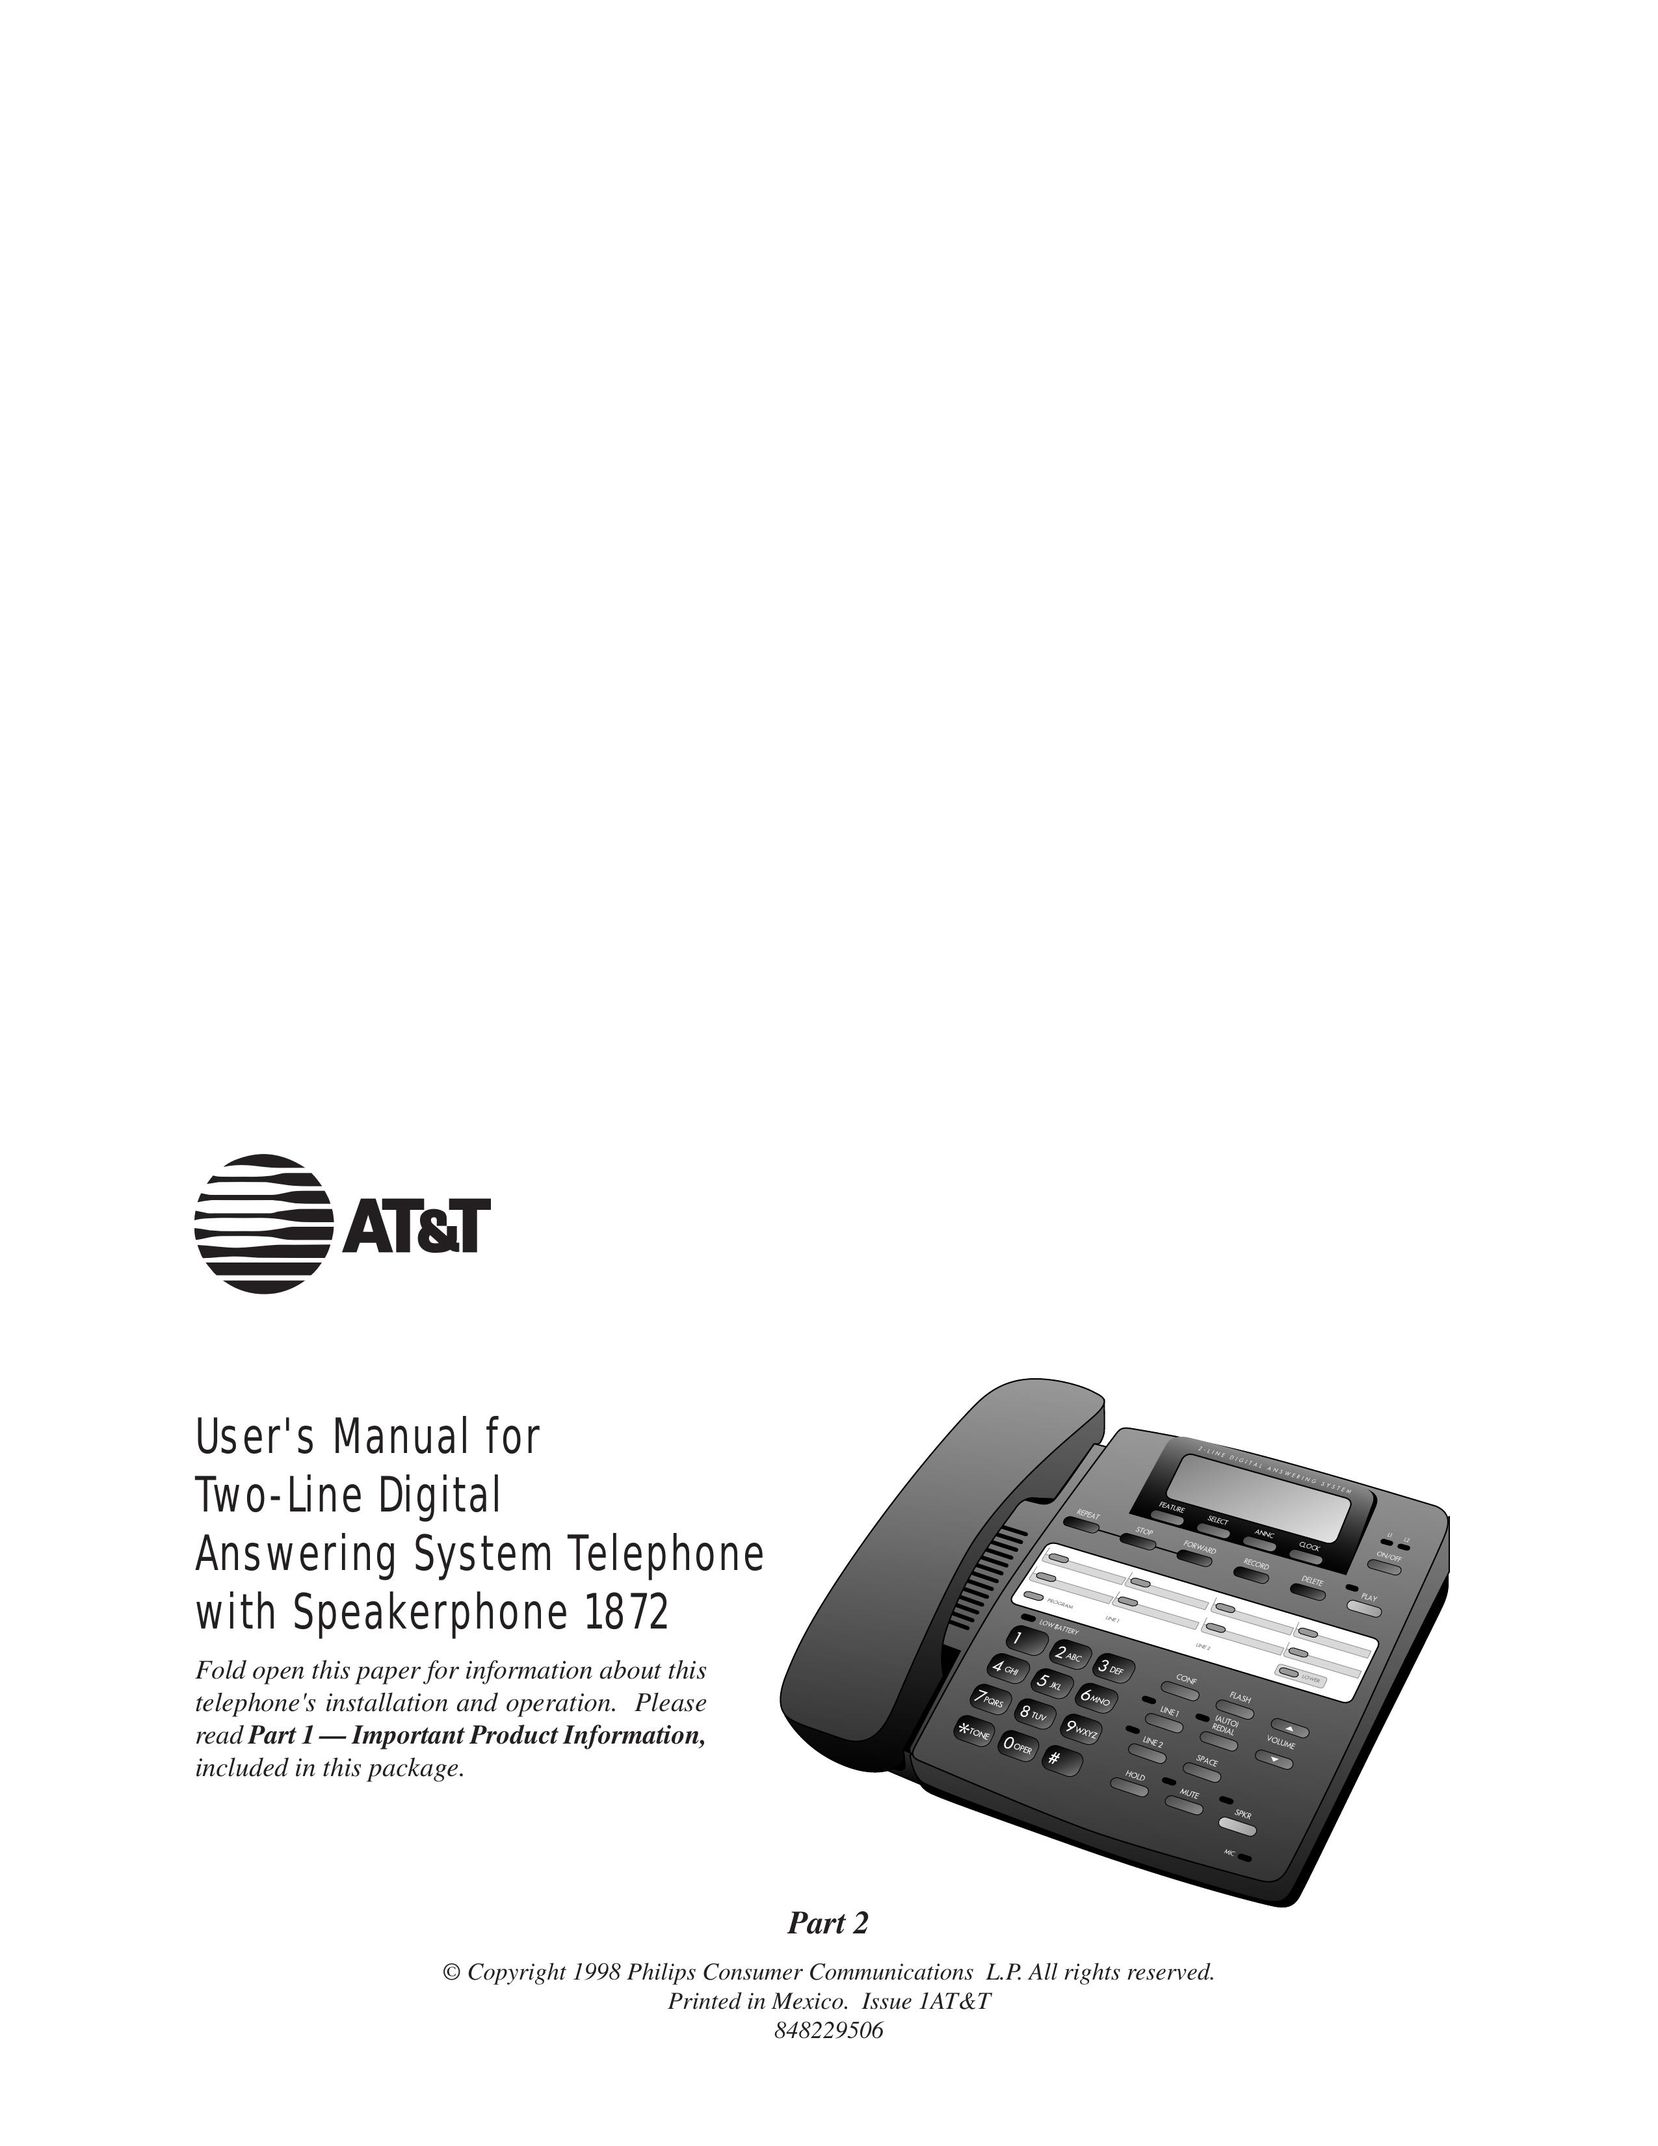 AT&T 1872 Conference Phone User Manual